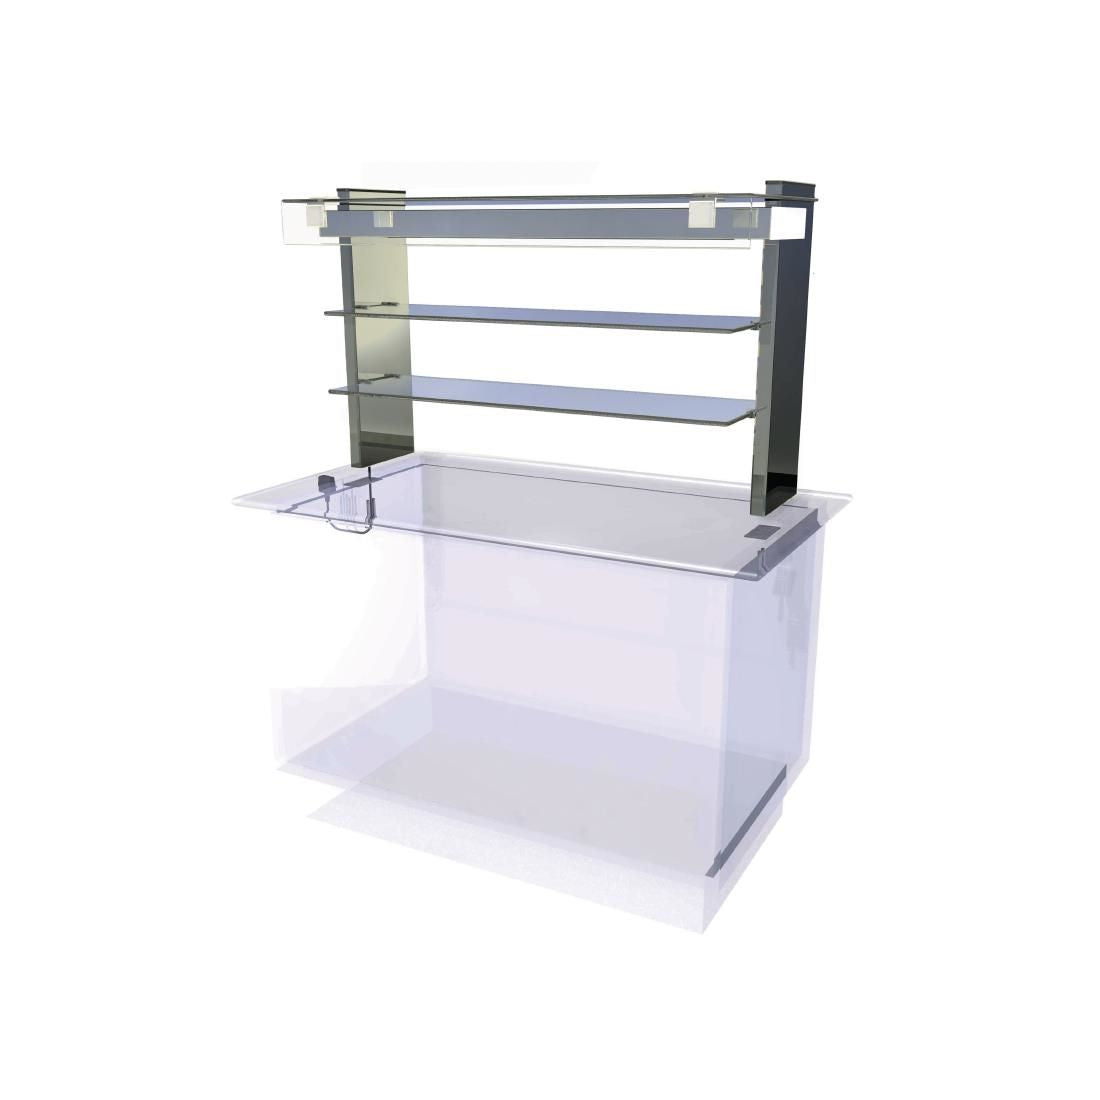 CW623 Kubus Drop In Ambient Multi Level Display KAMG3 JD Catering Equipment Solutions Ltd